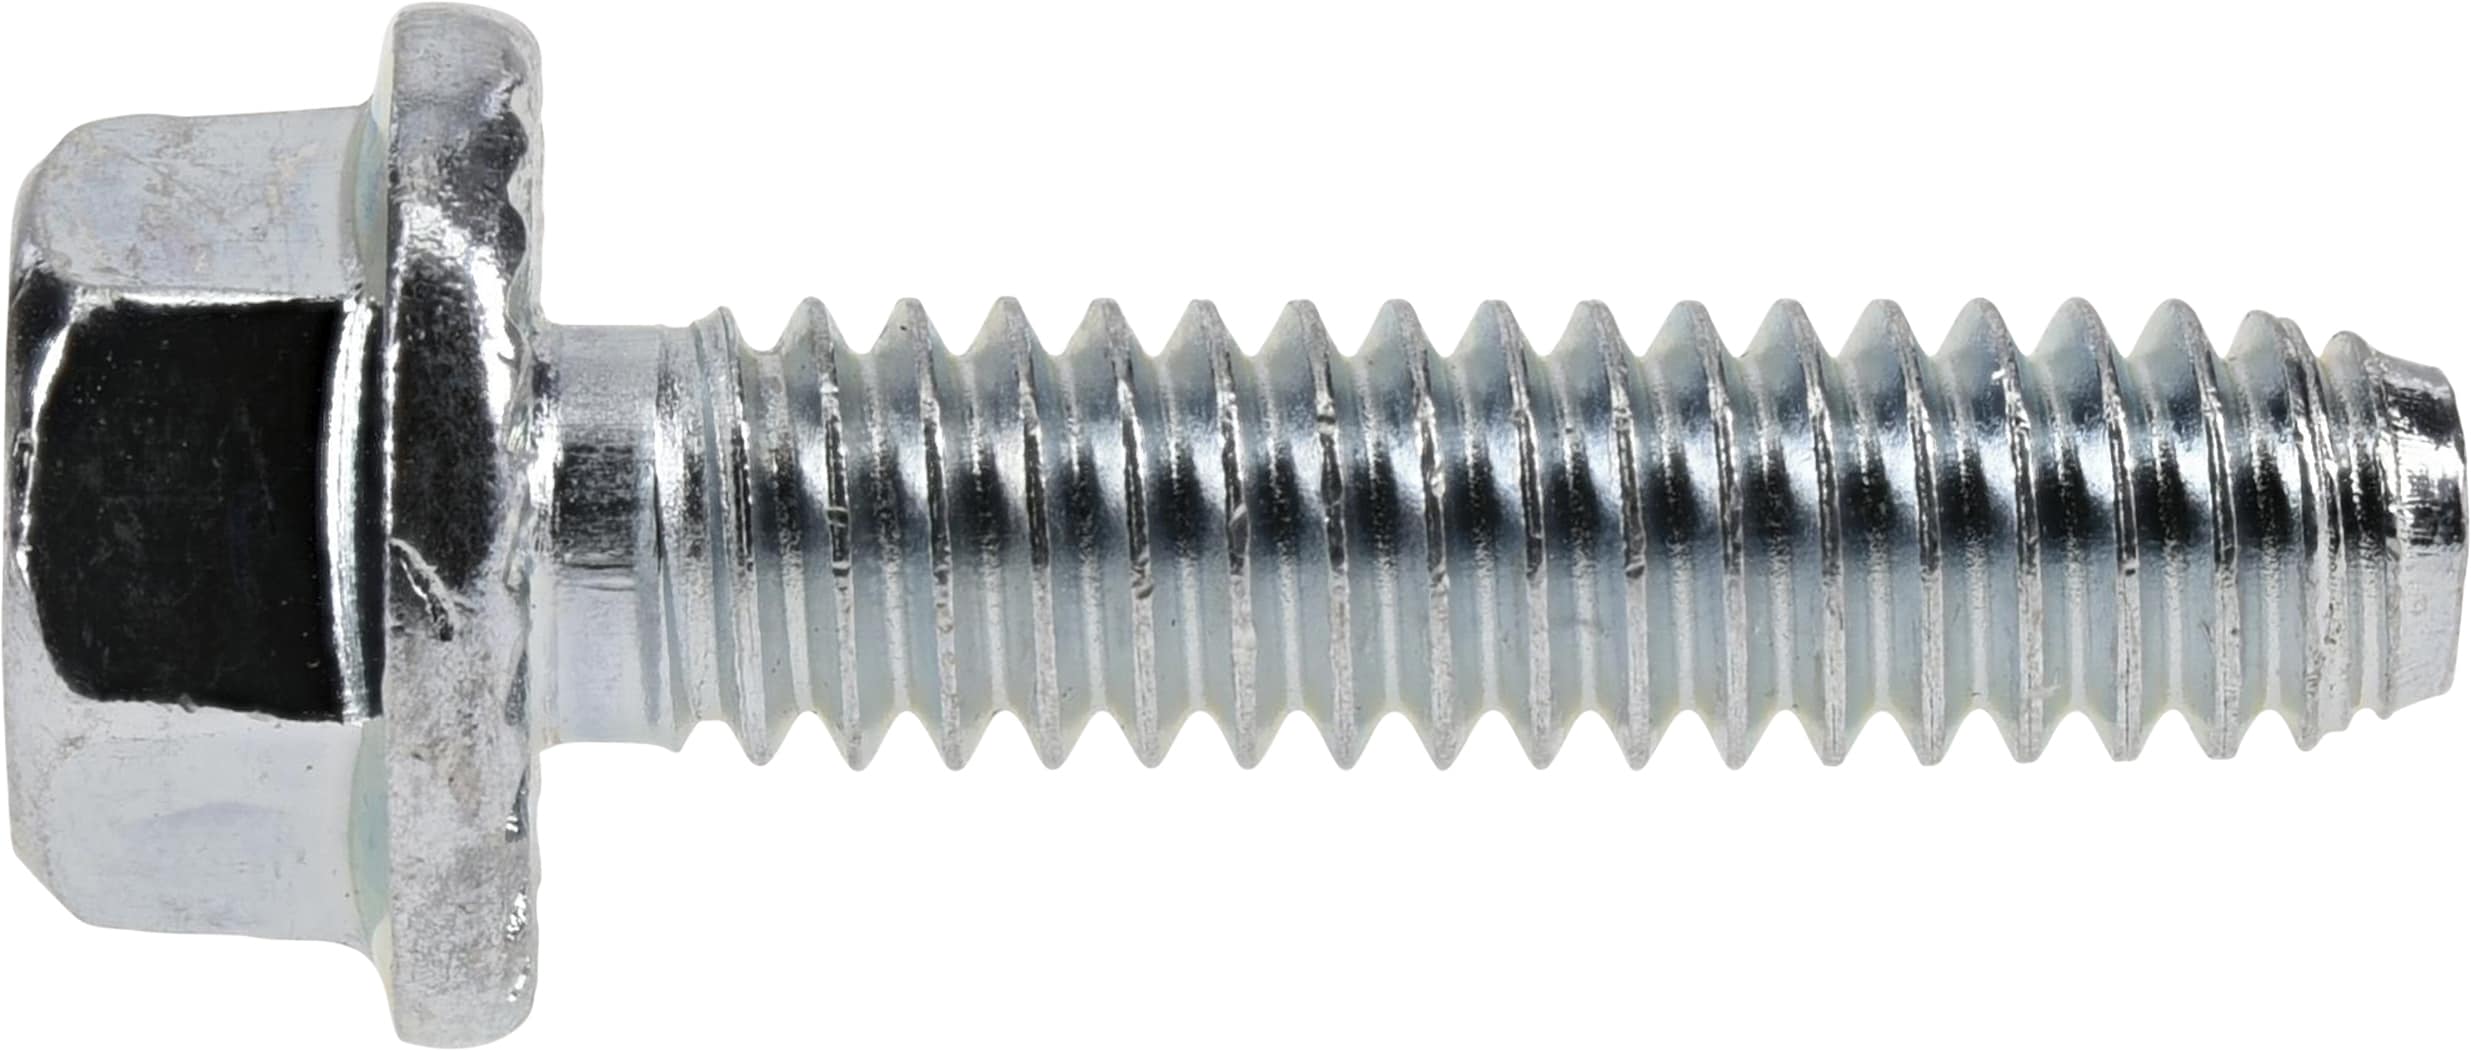 Hillman 14 In X 1 In Zinc Plated Coarse Thread Hex Bolt 2 Count In The Hex Bolts Department